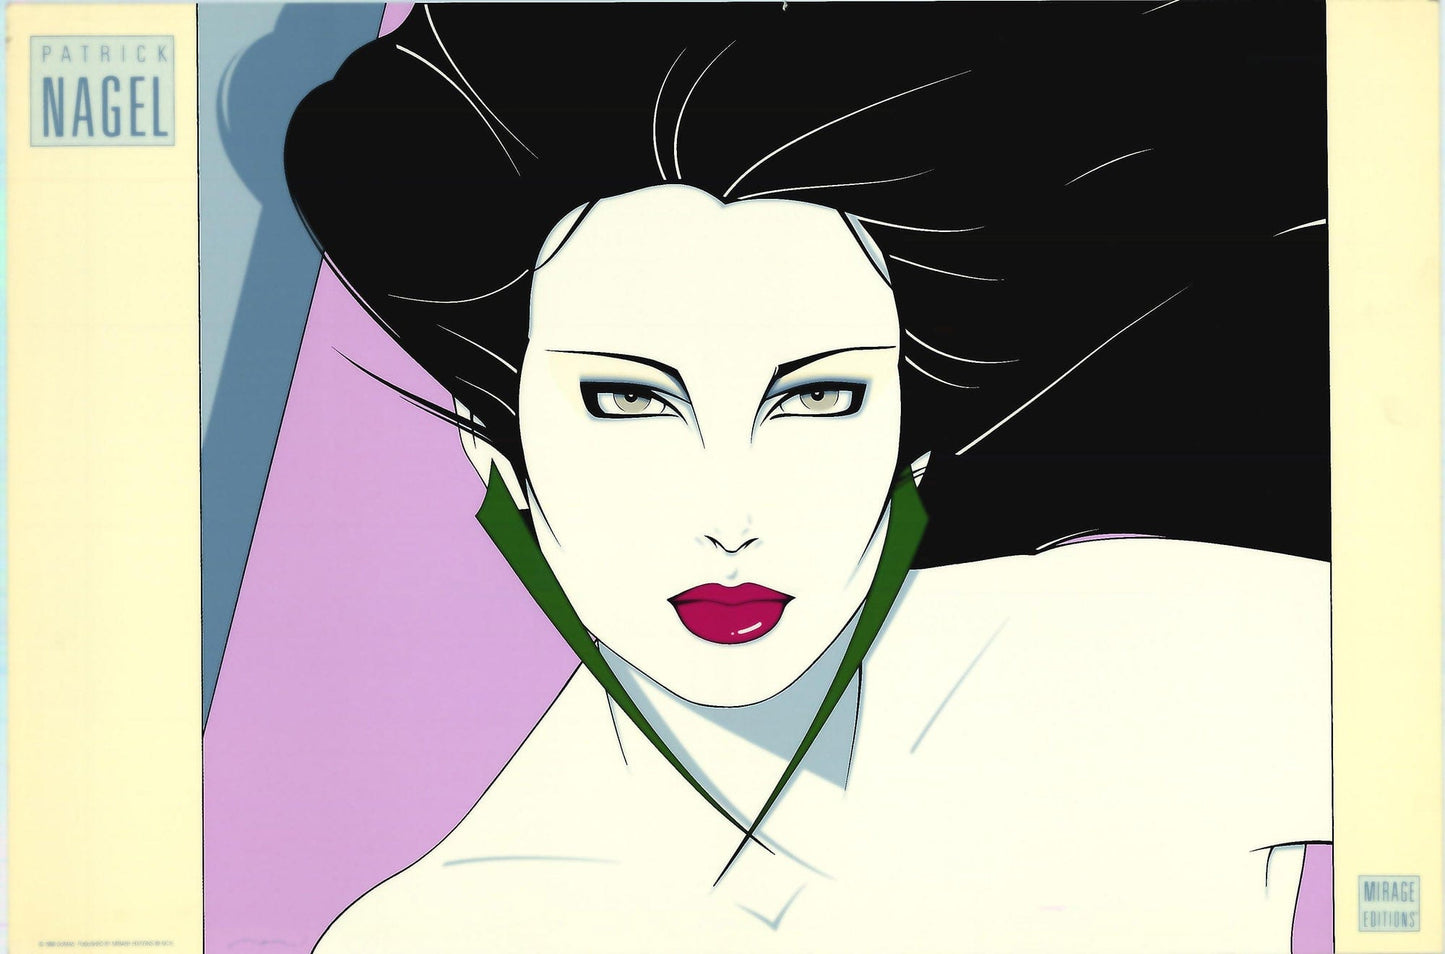 Patrick Nagel (After): Mirage Editions Inc #15